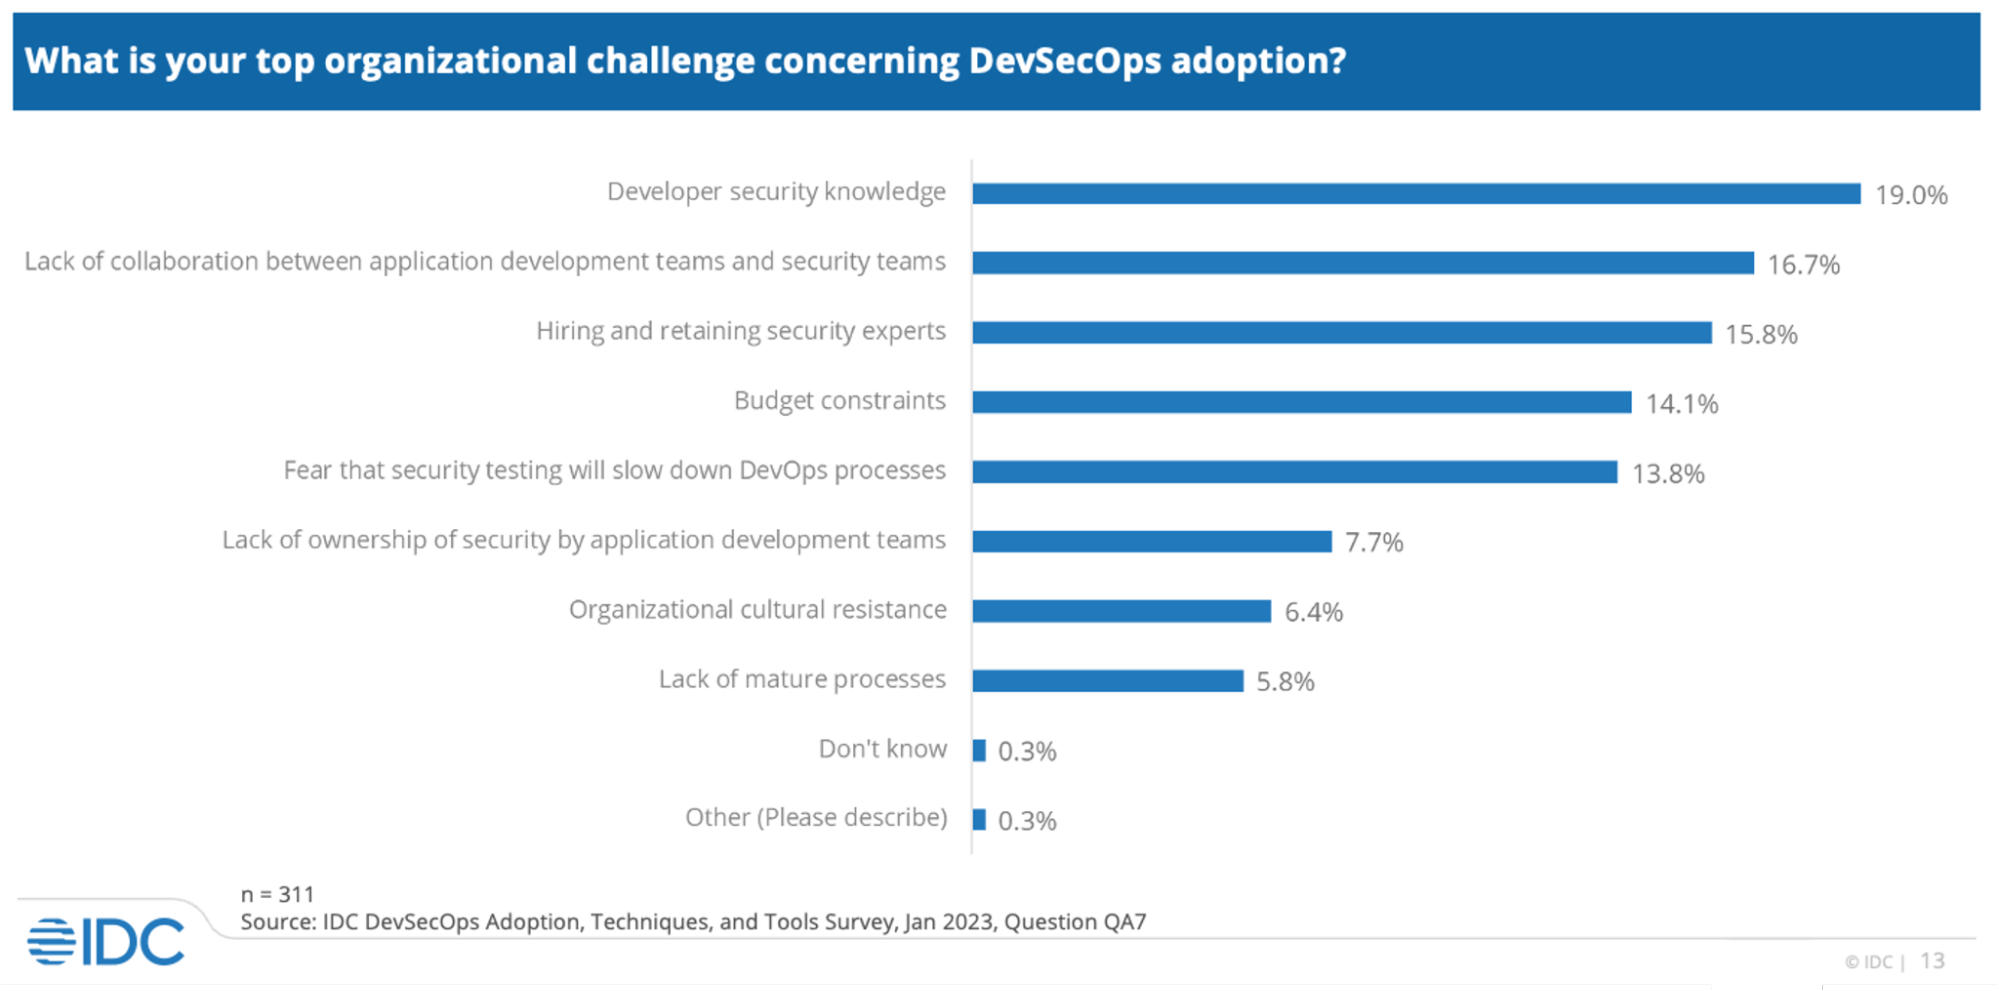 *IDC DevSecOps Adoption, Techniques, and Tools Survey, Doc # US50137623, May 2023 